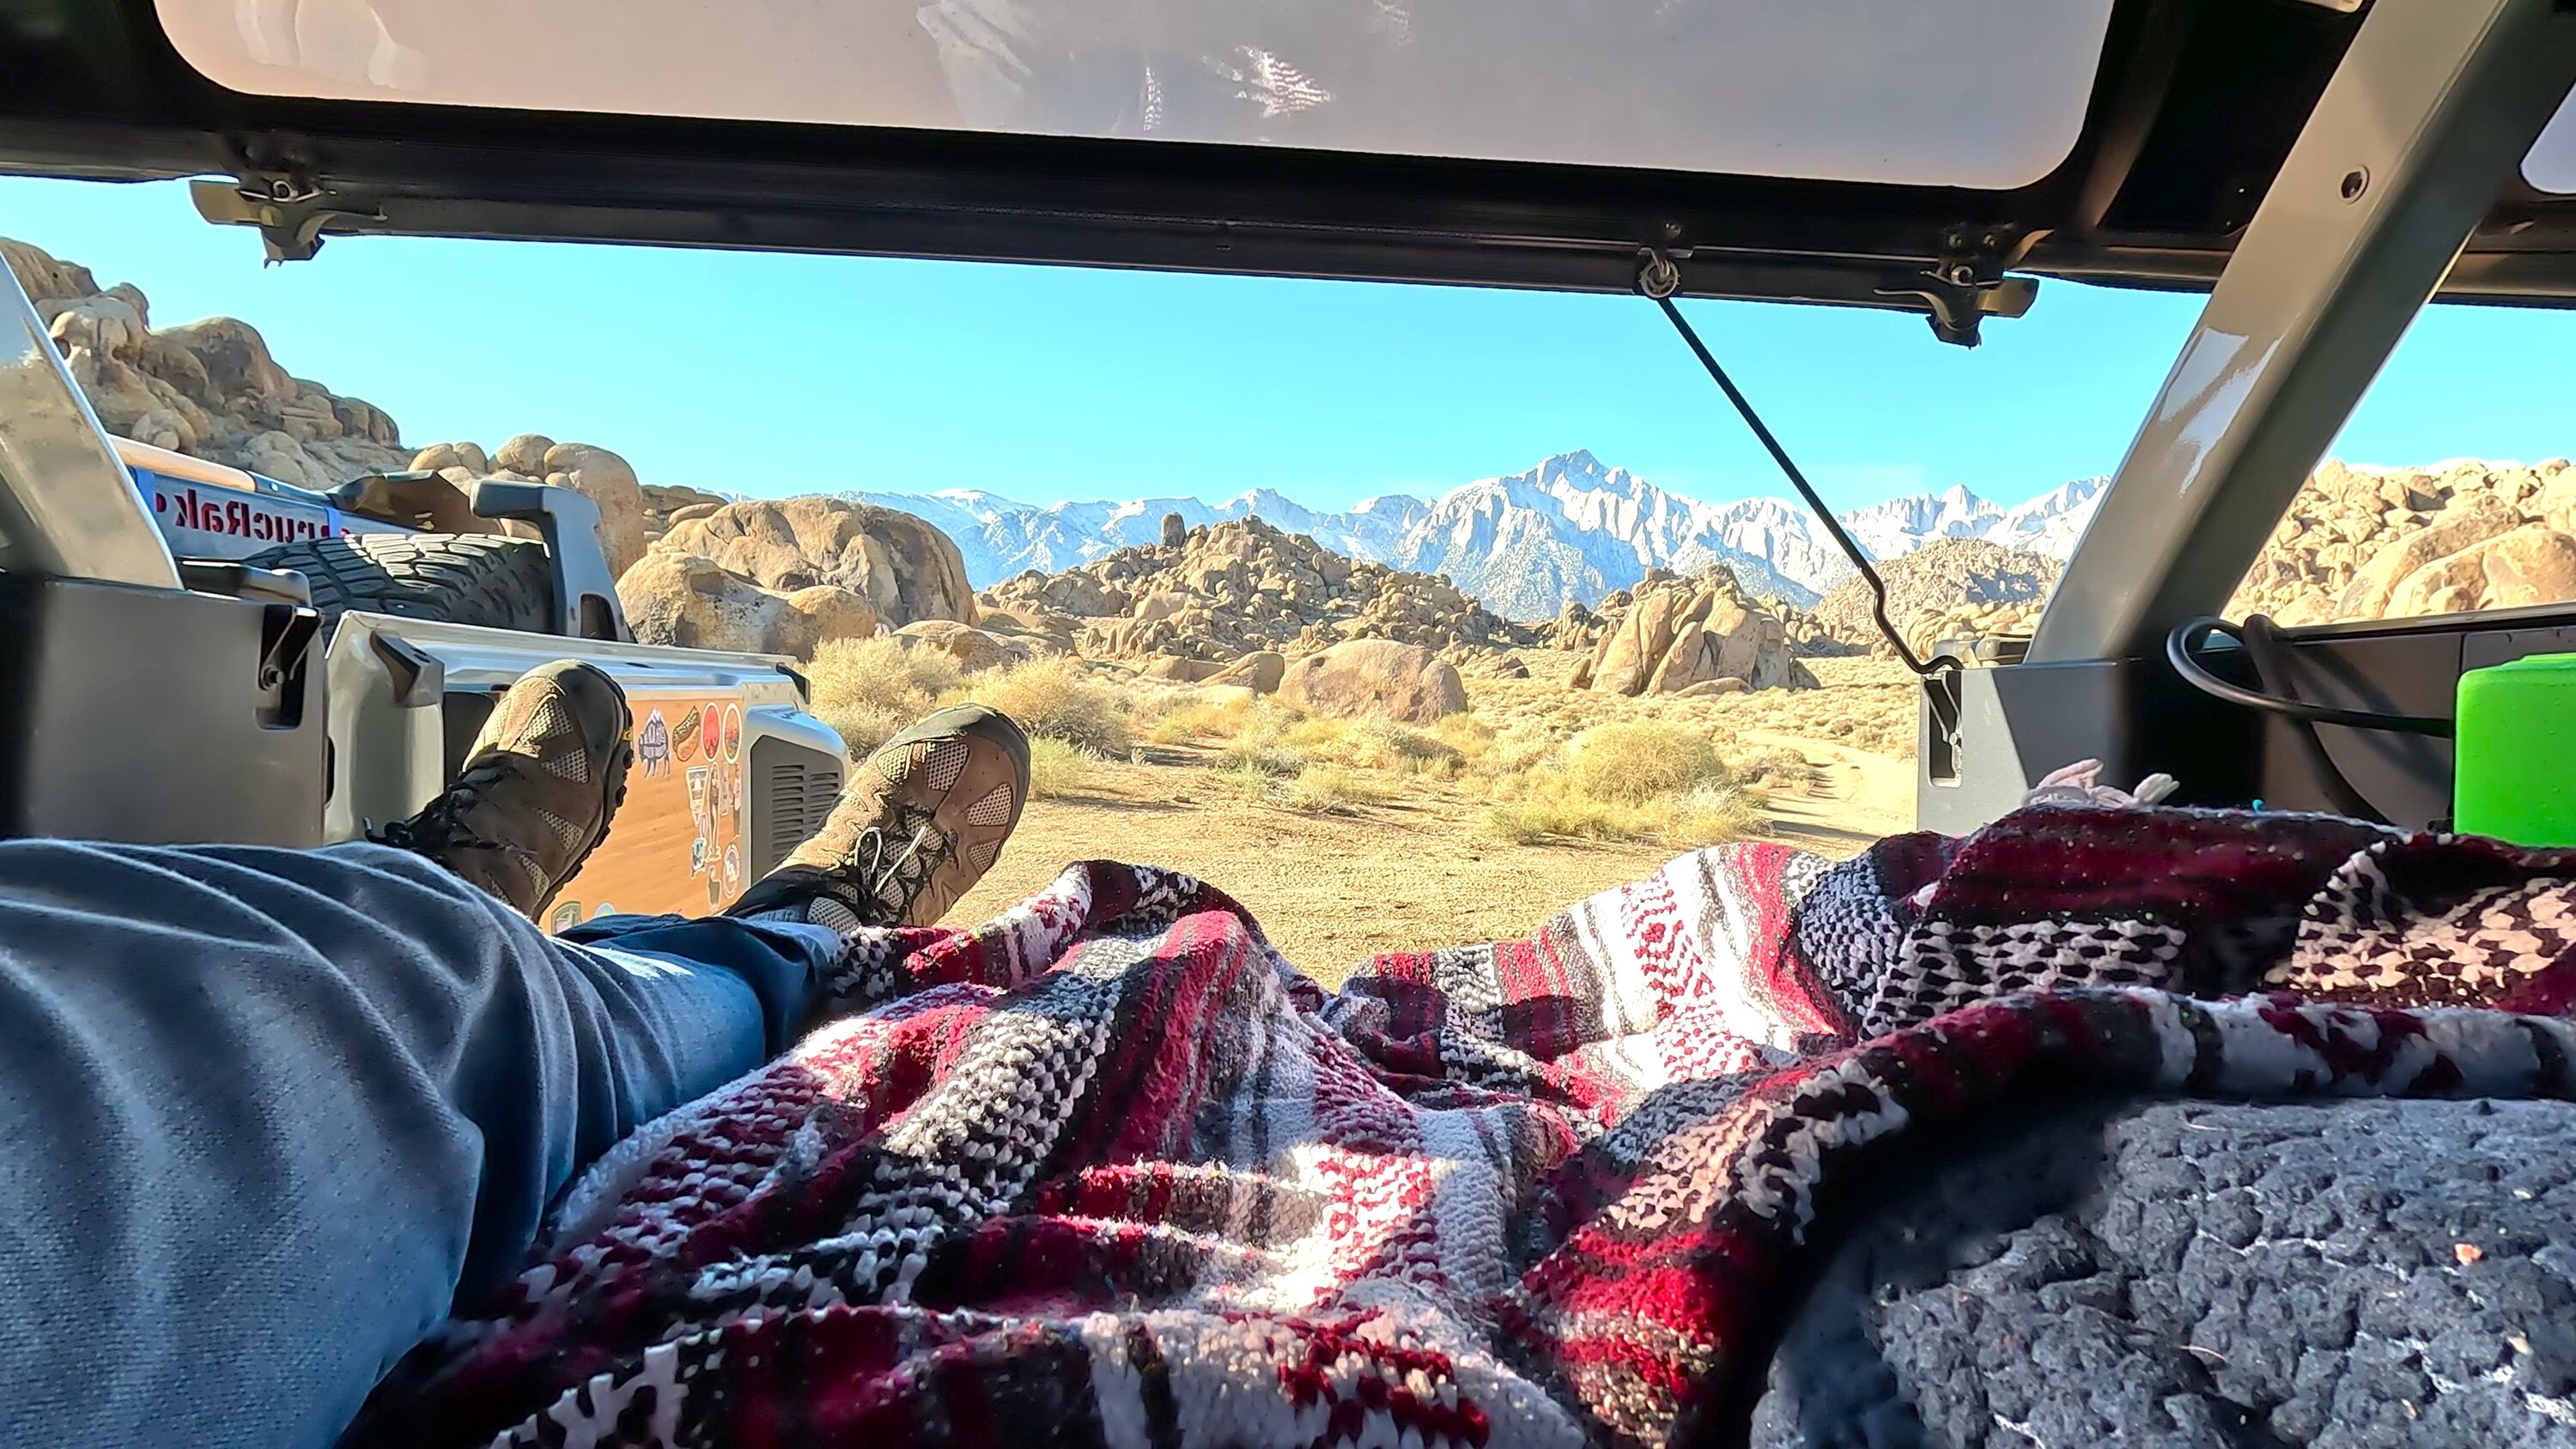 Ford Bronco Finding an EPIC campsite and sleeping in the back of the Bronco - Alabama Hills [pics and video] 1-sleepview